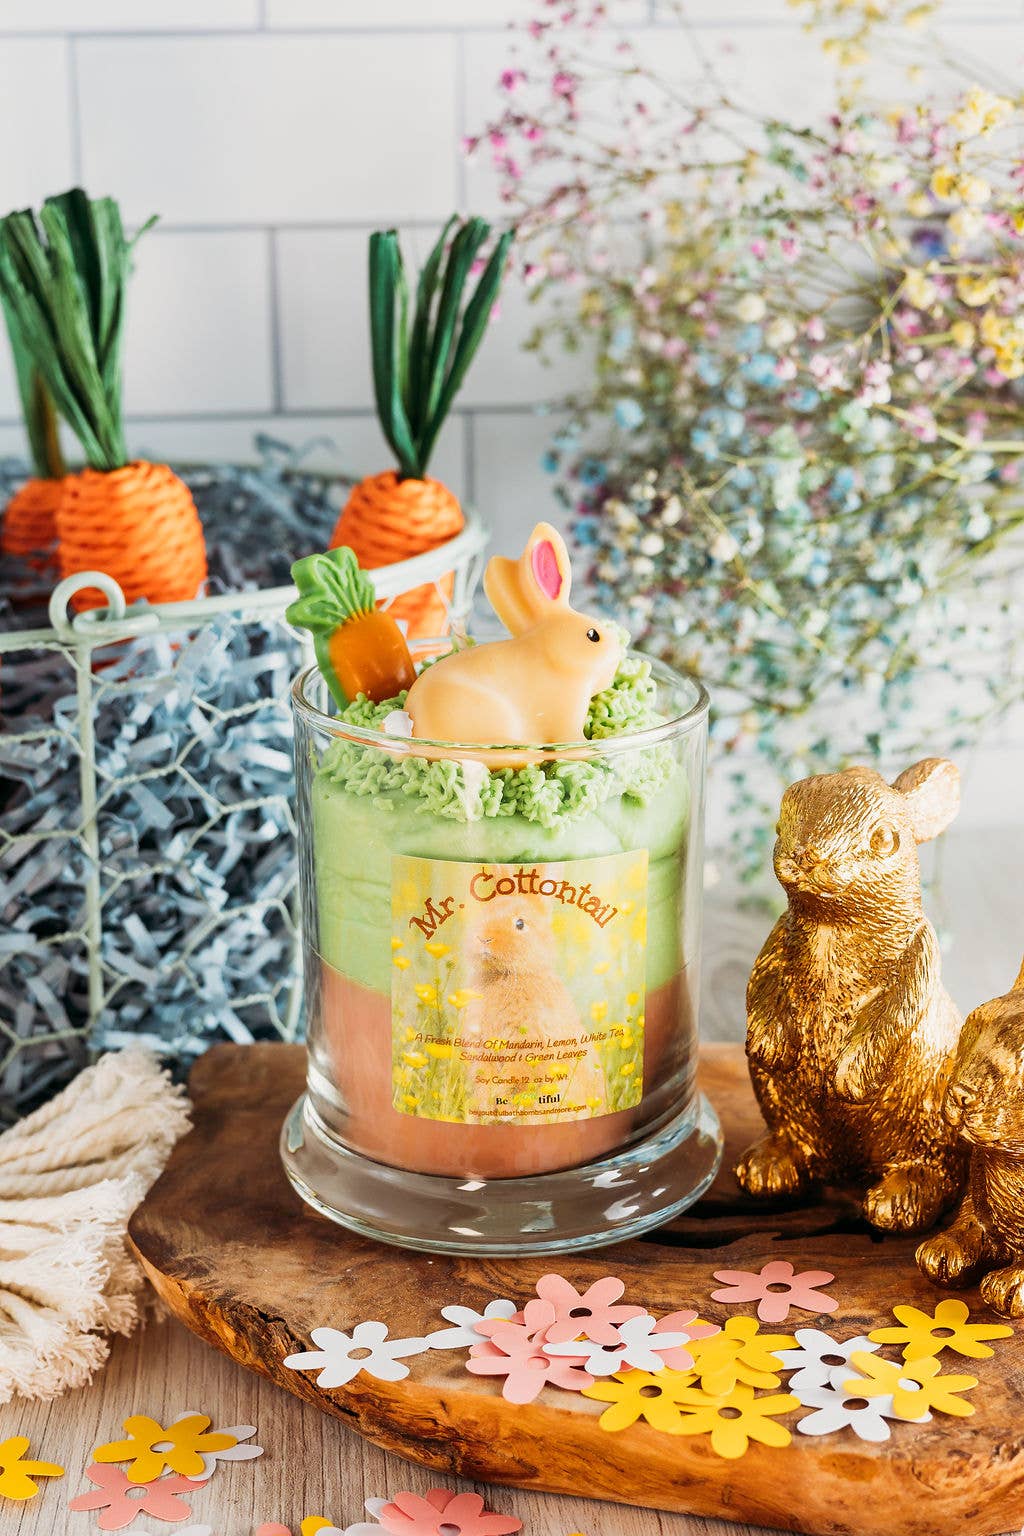 Mr. Cottontail Dessert Candle